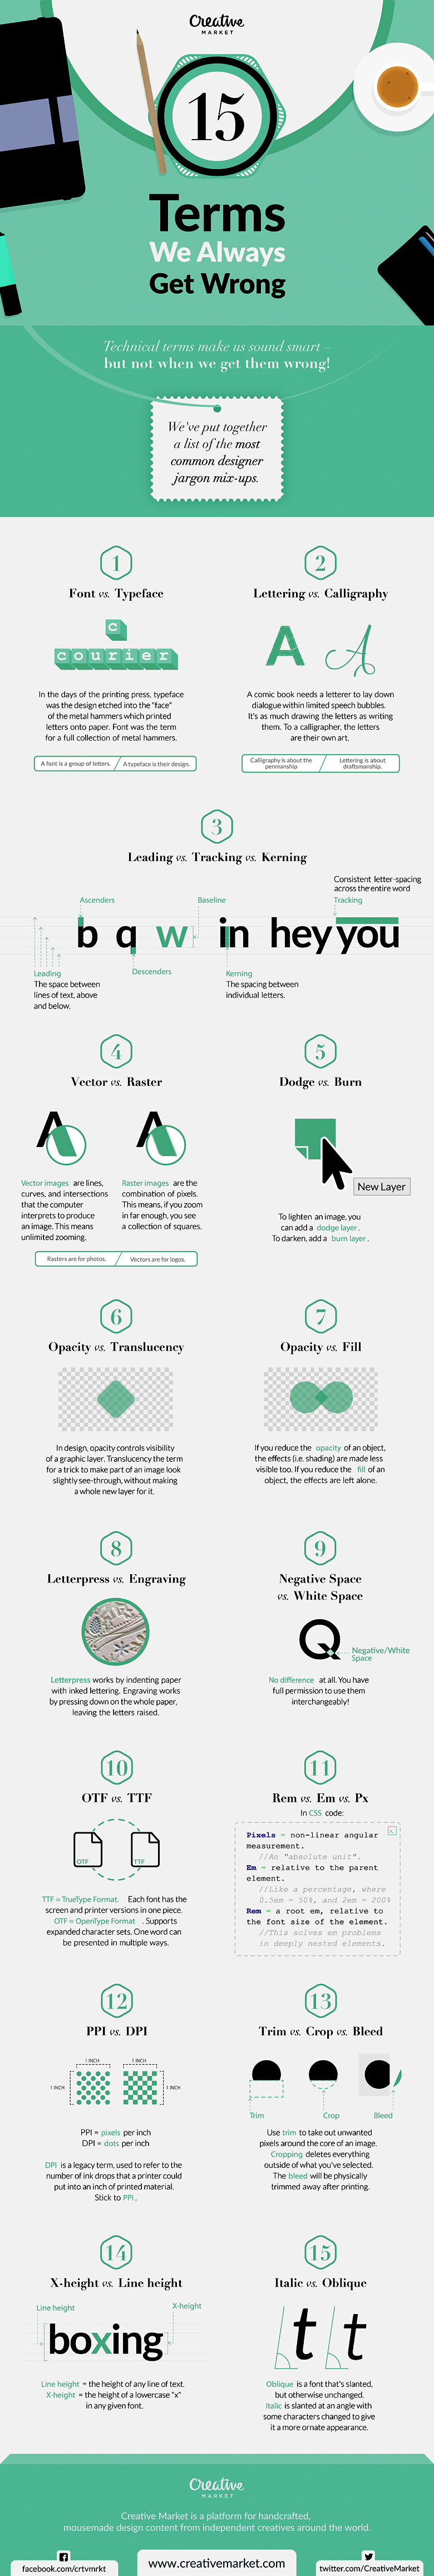 15 Design Terms That Most Designers Get Wrong (Font vs. Typeface, Opacity vs. Fill, etc.)